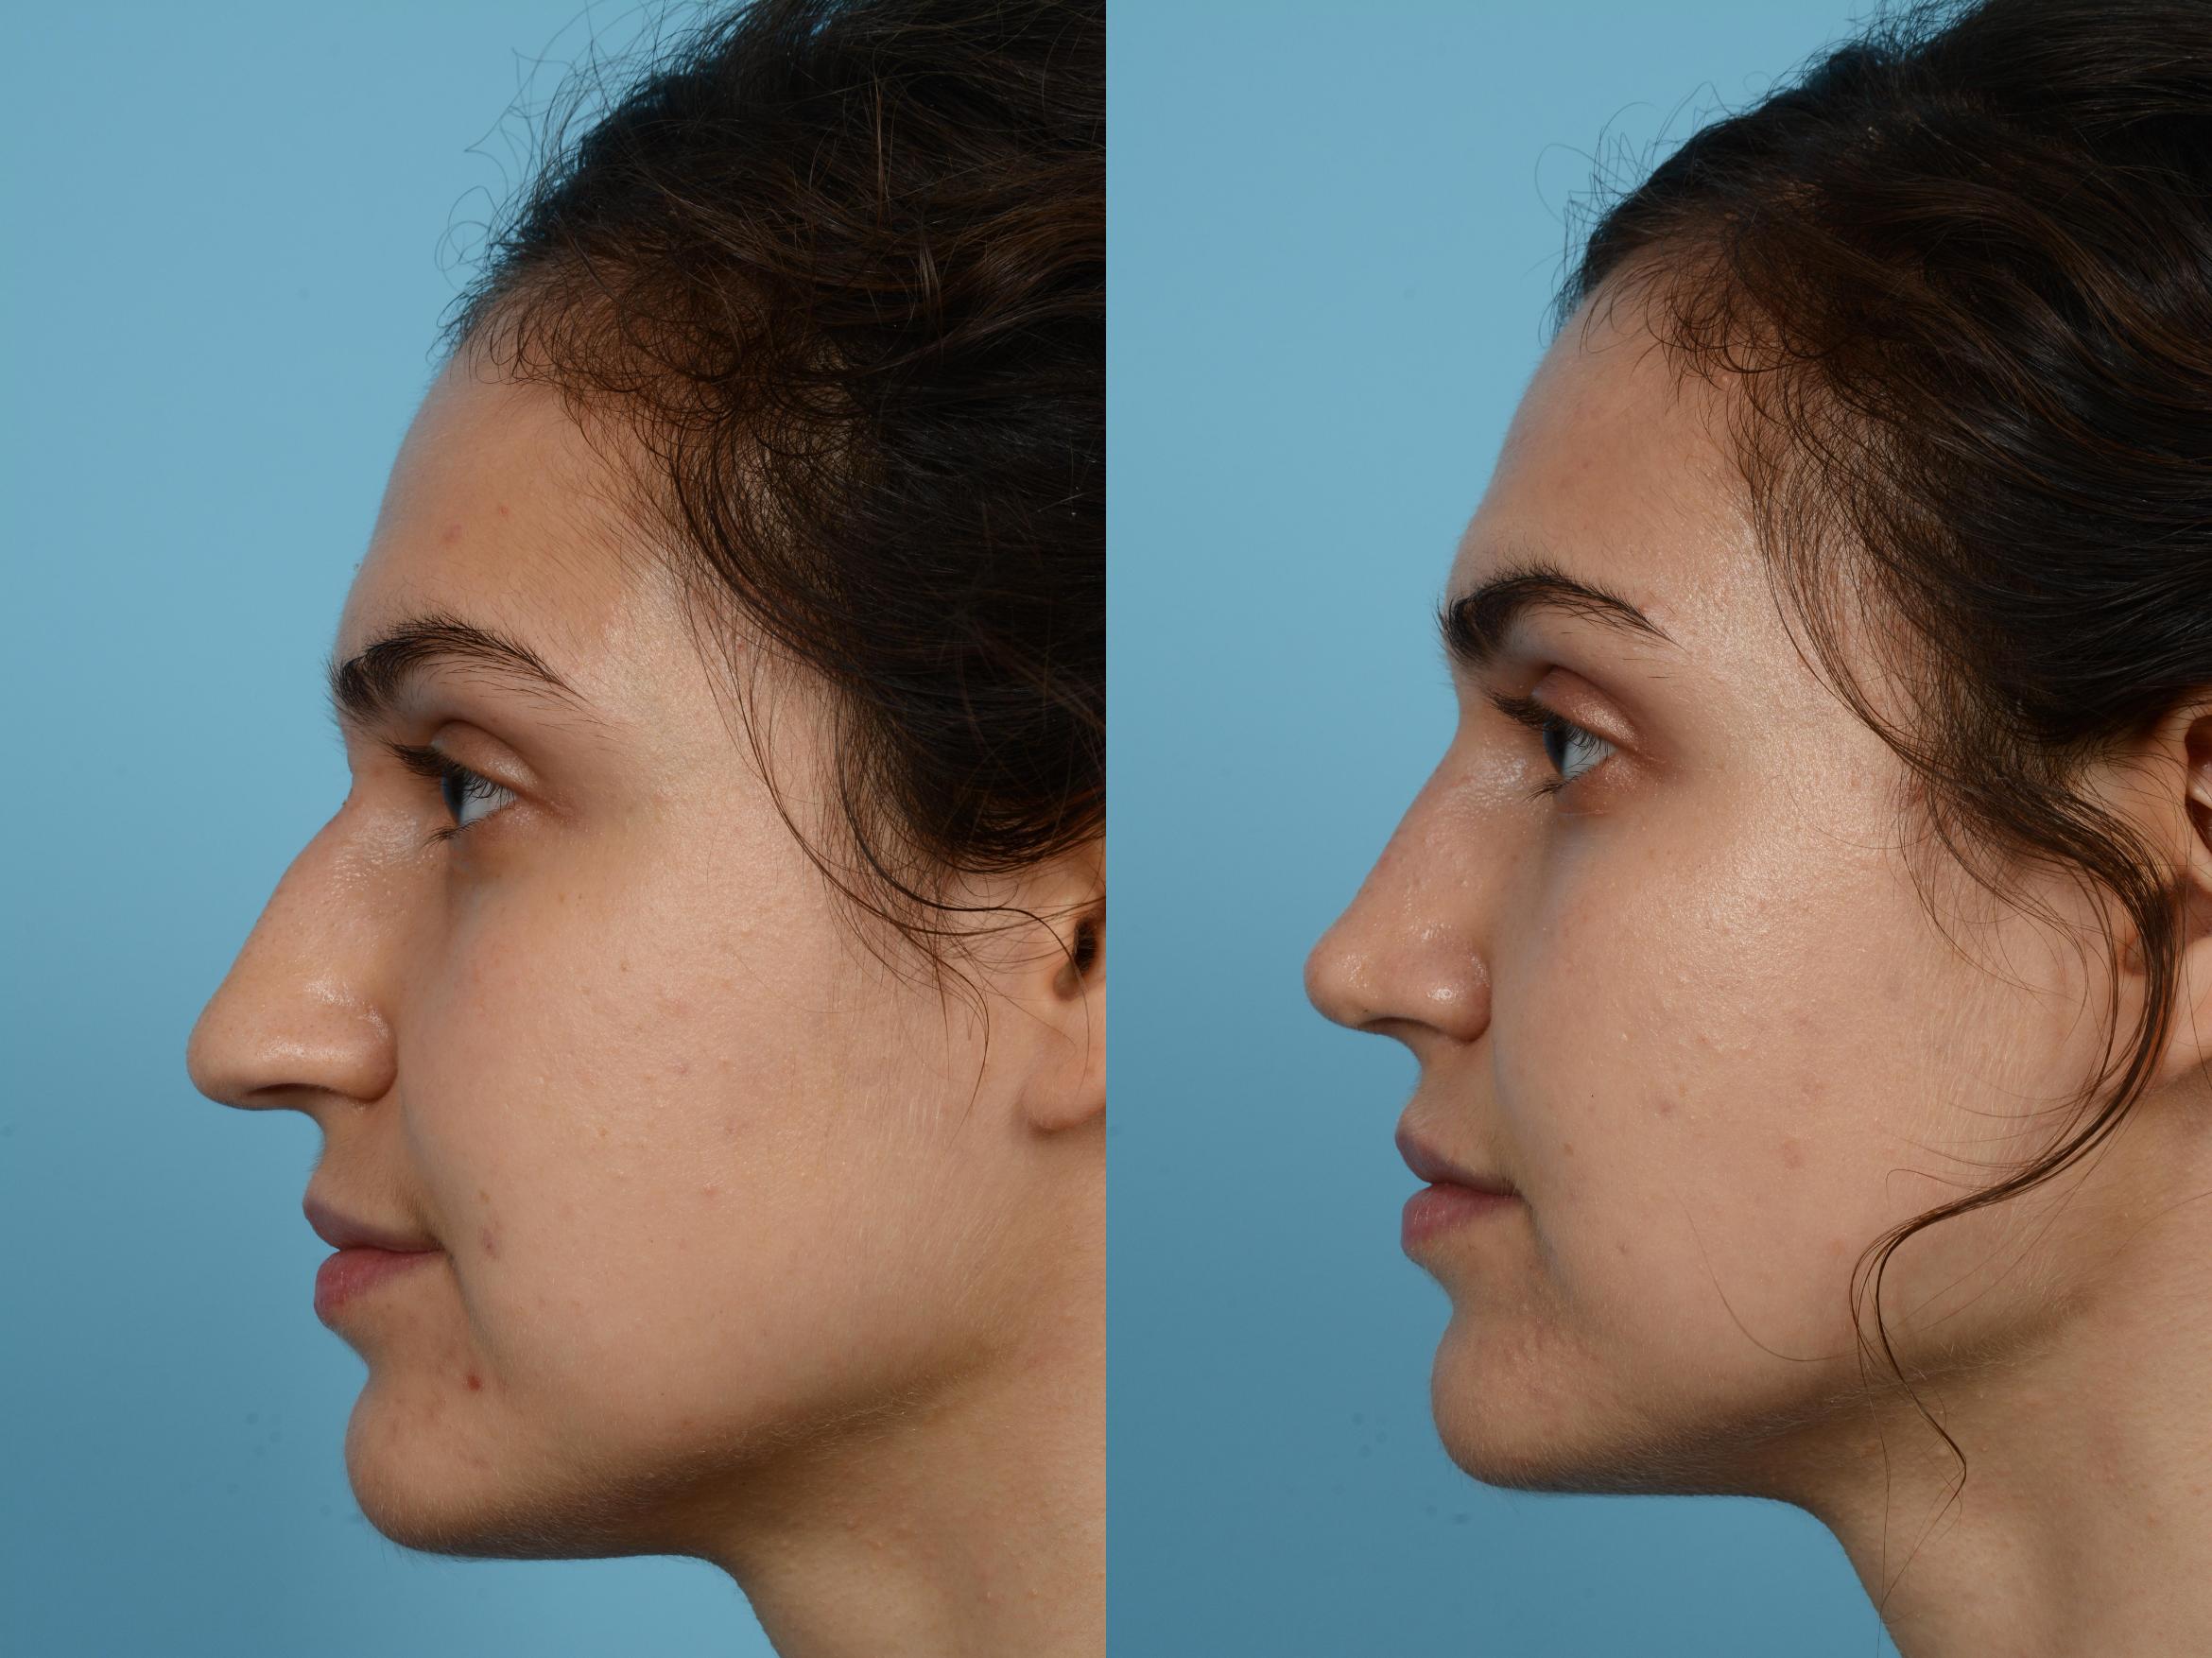 How much does a nose job cost 2011 uk